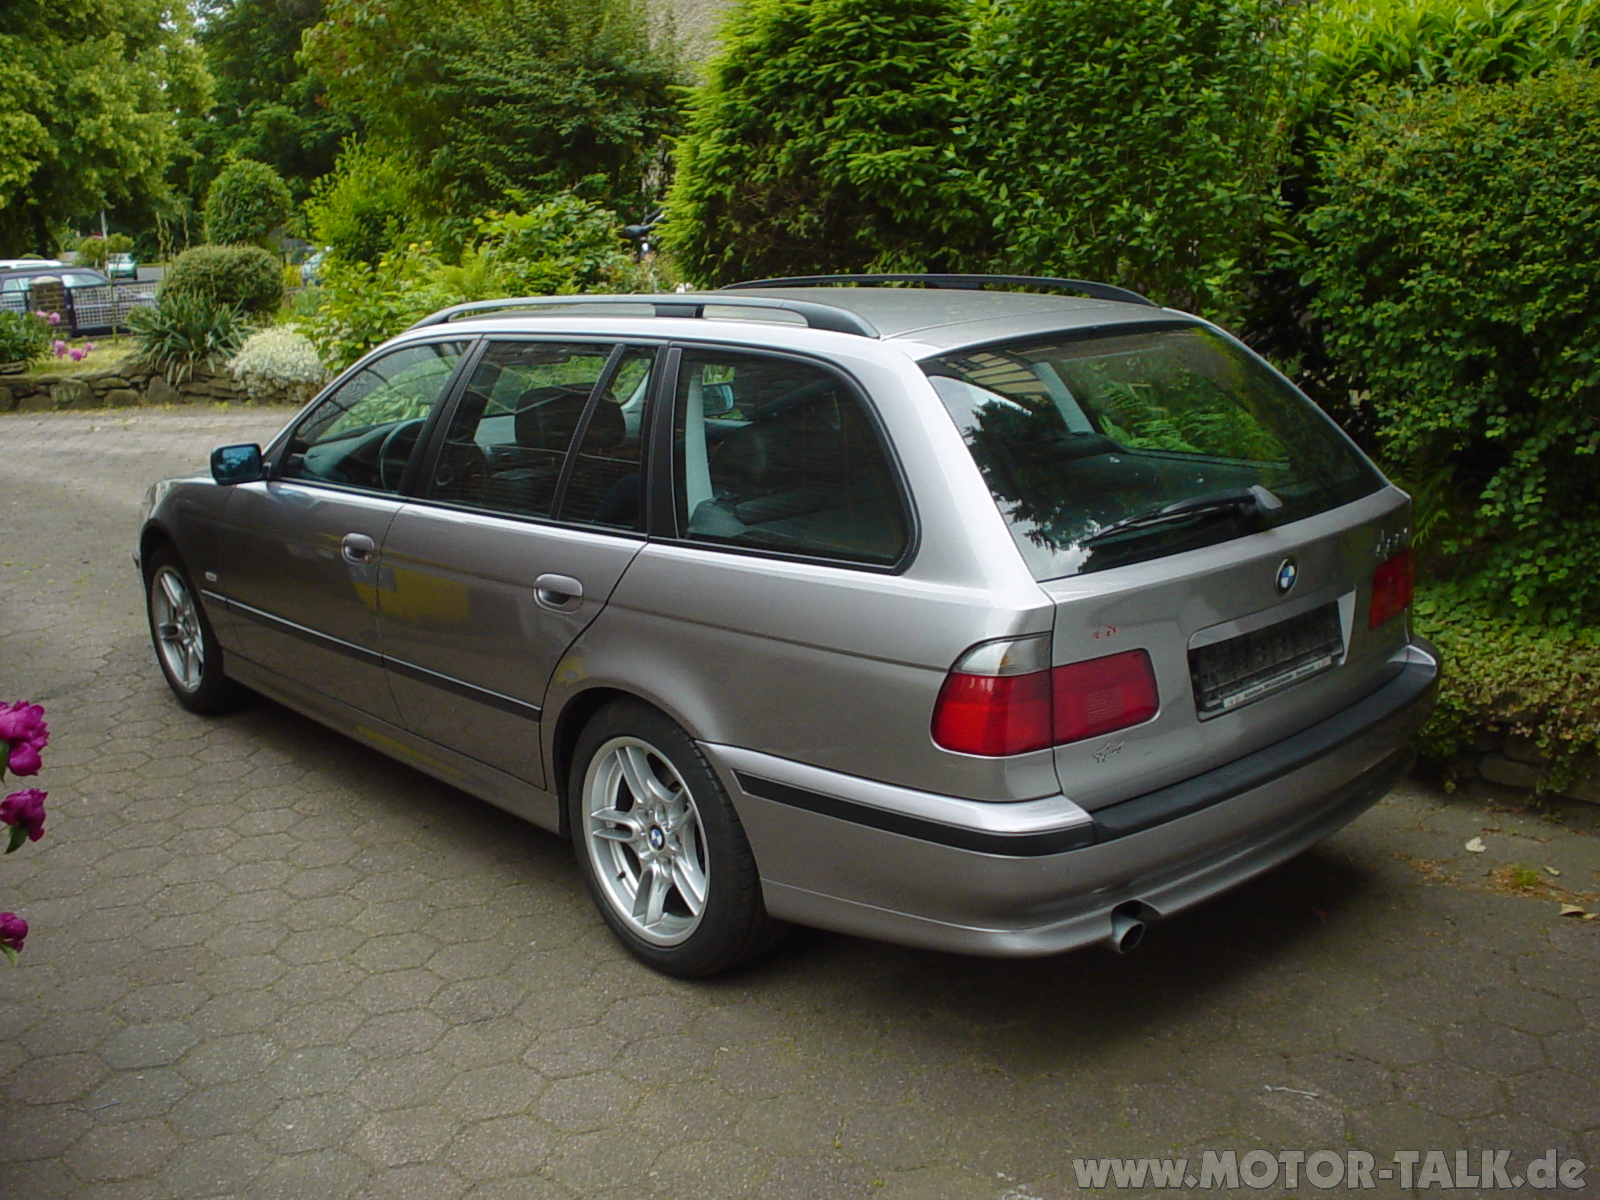 Bmw e39 528i touring specifications #4